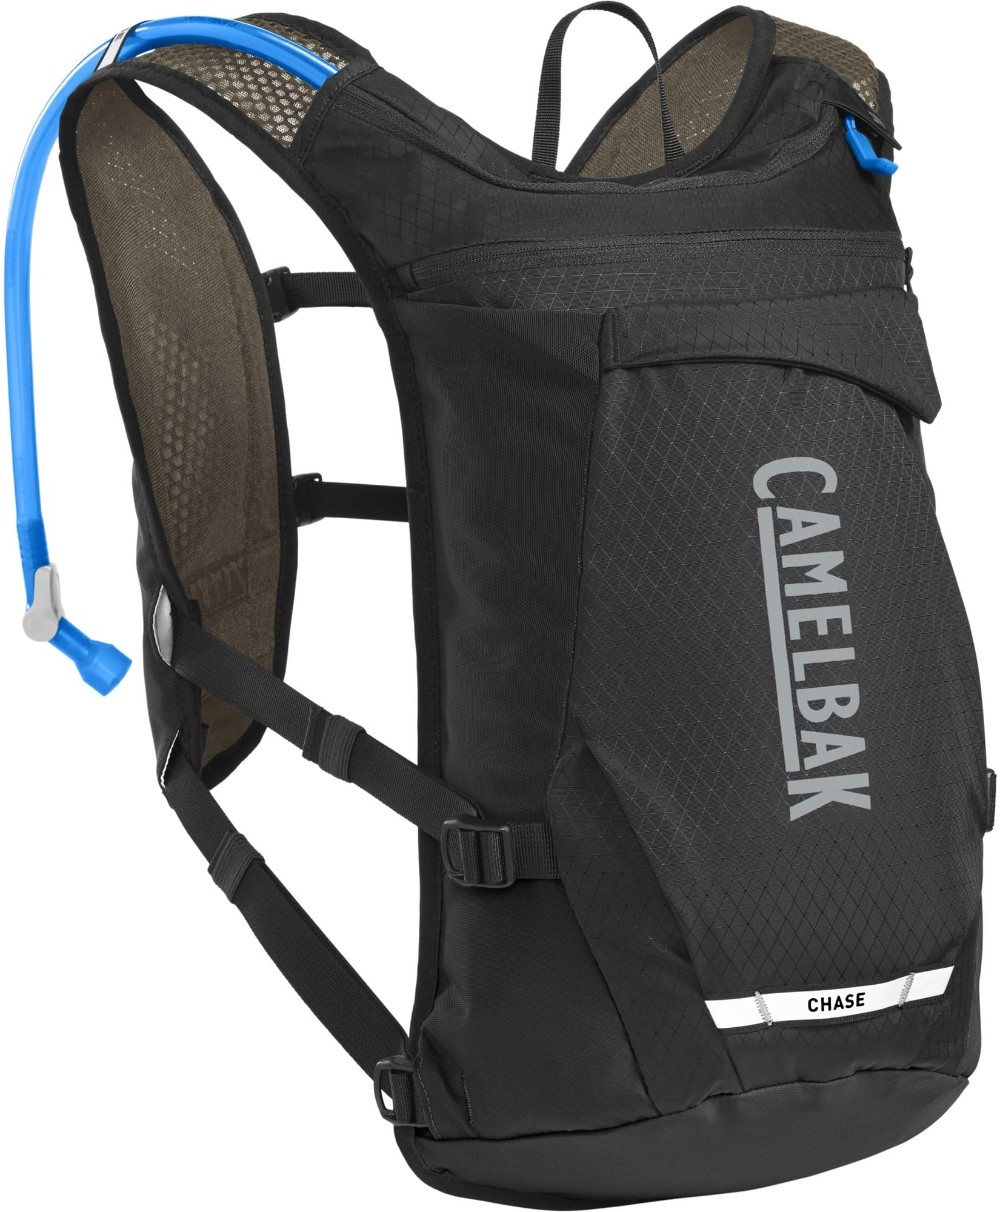 Chase Adventure Pack 8L Hydration Vest with 2L Reservoir image 0